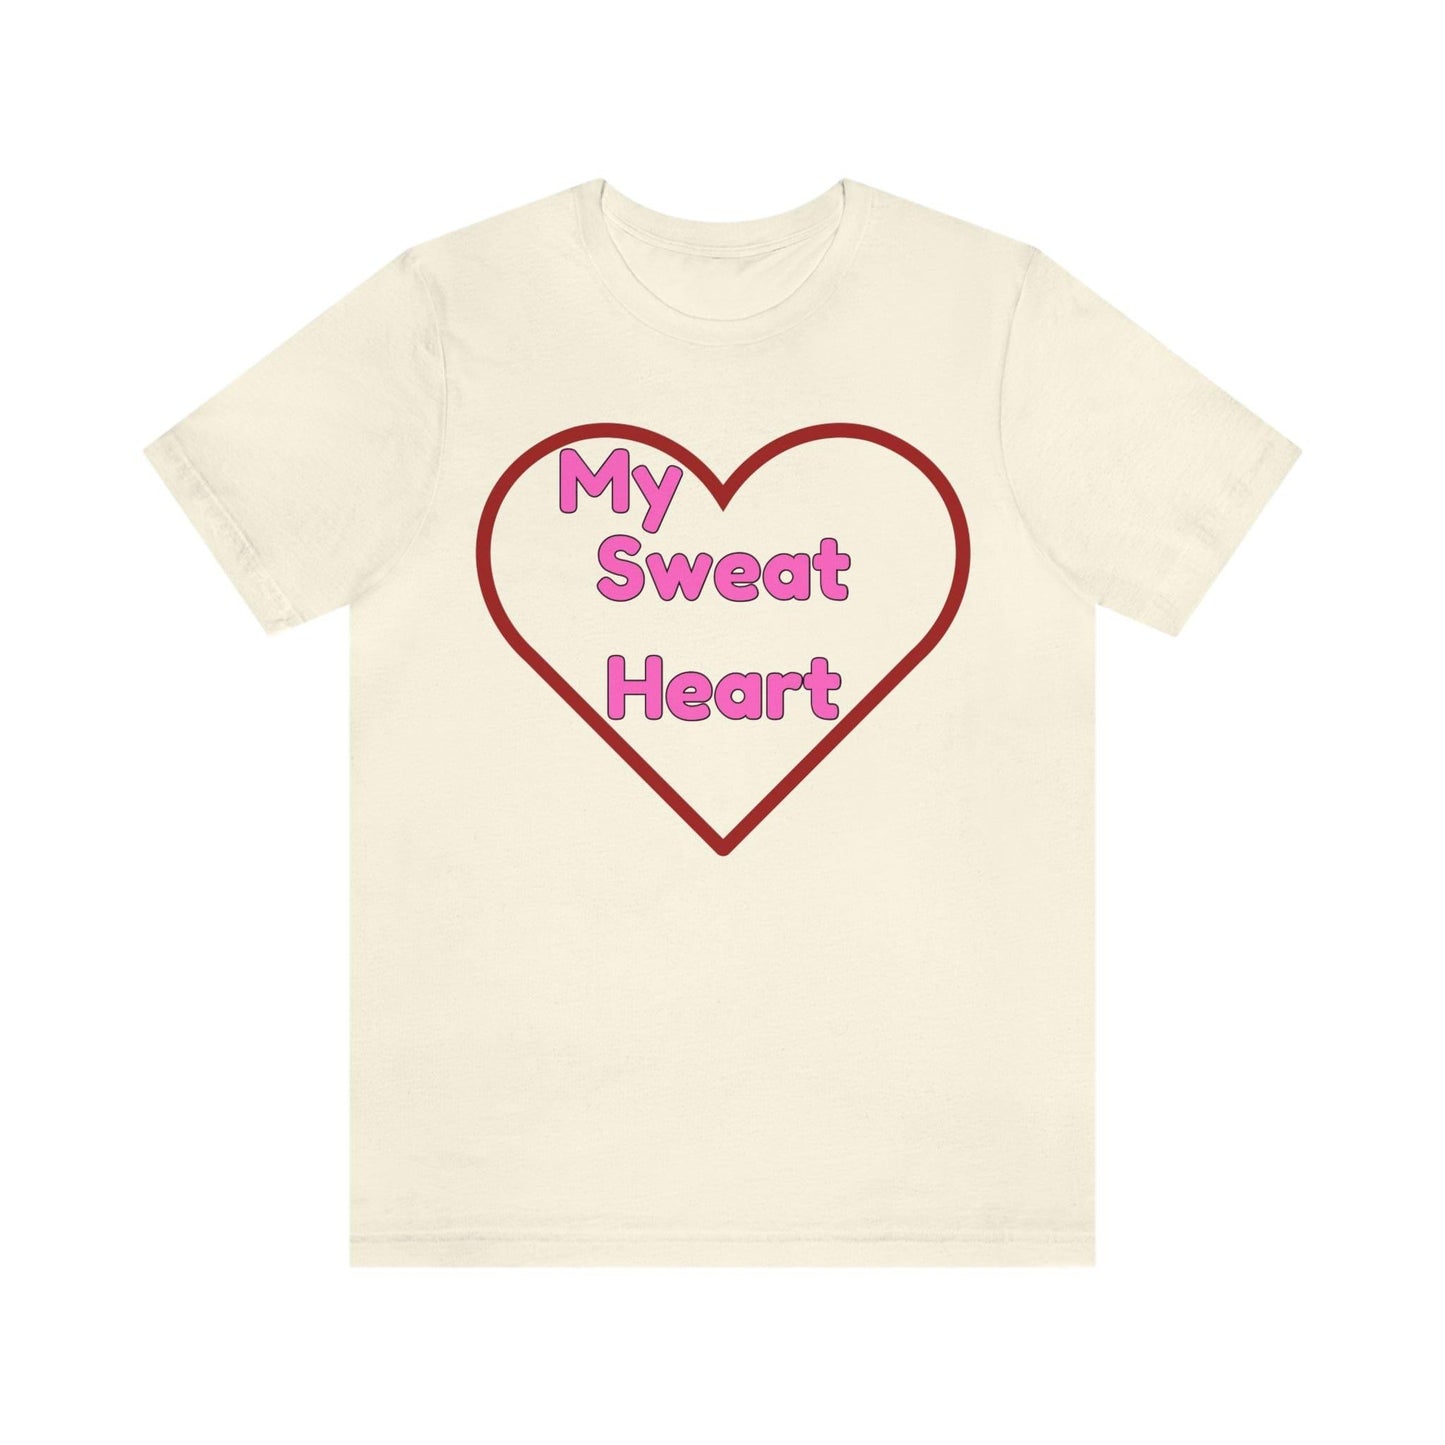 My Sweat Heart - Love shirt - Gift for wife - Gift for Husband - Gift for Girlfriend and Boyfriend - Giftsmojo